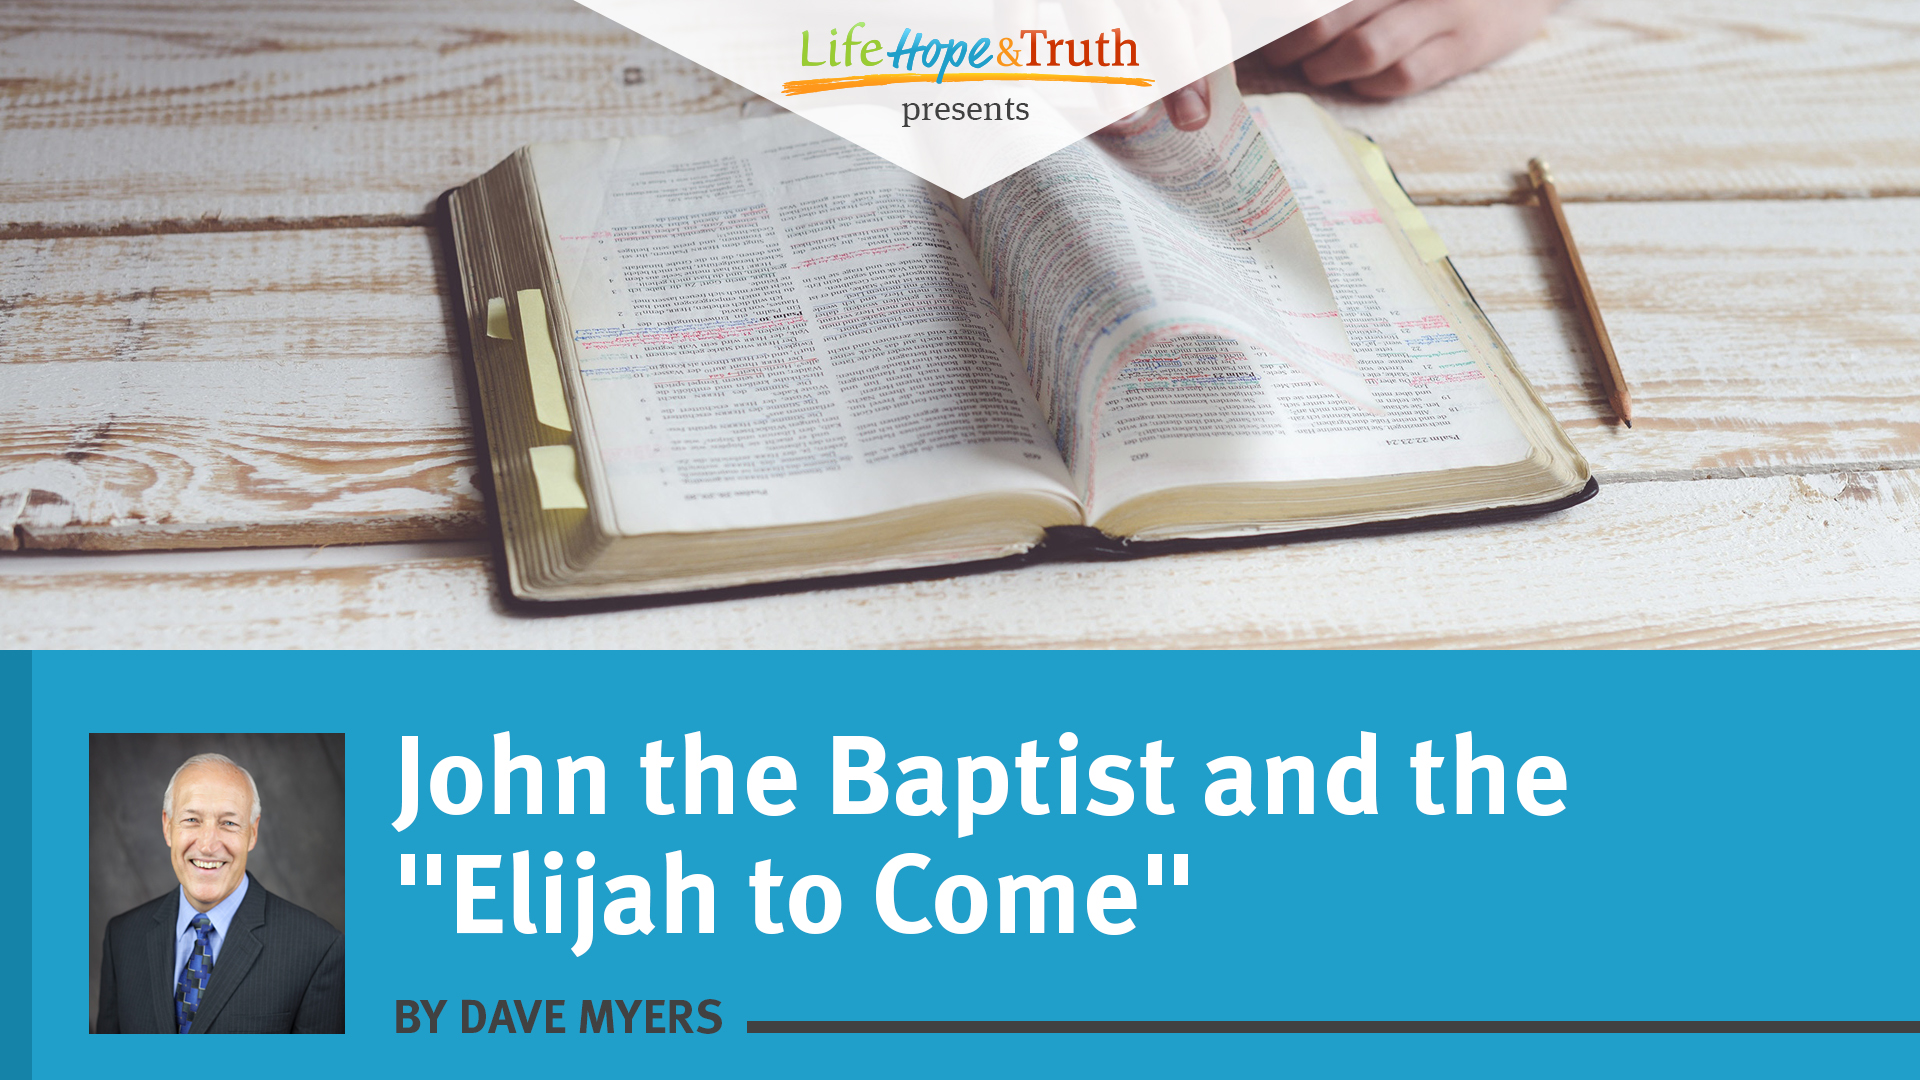 John the Baptist and the “Elijah to Come”